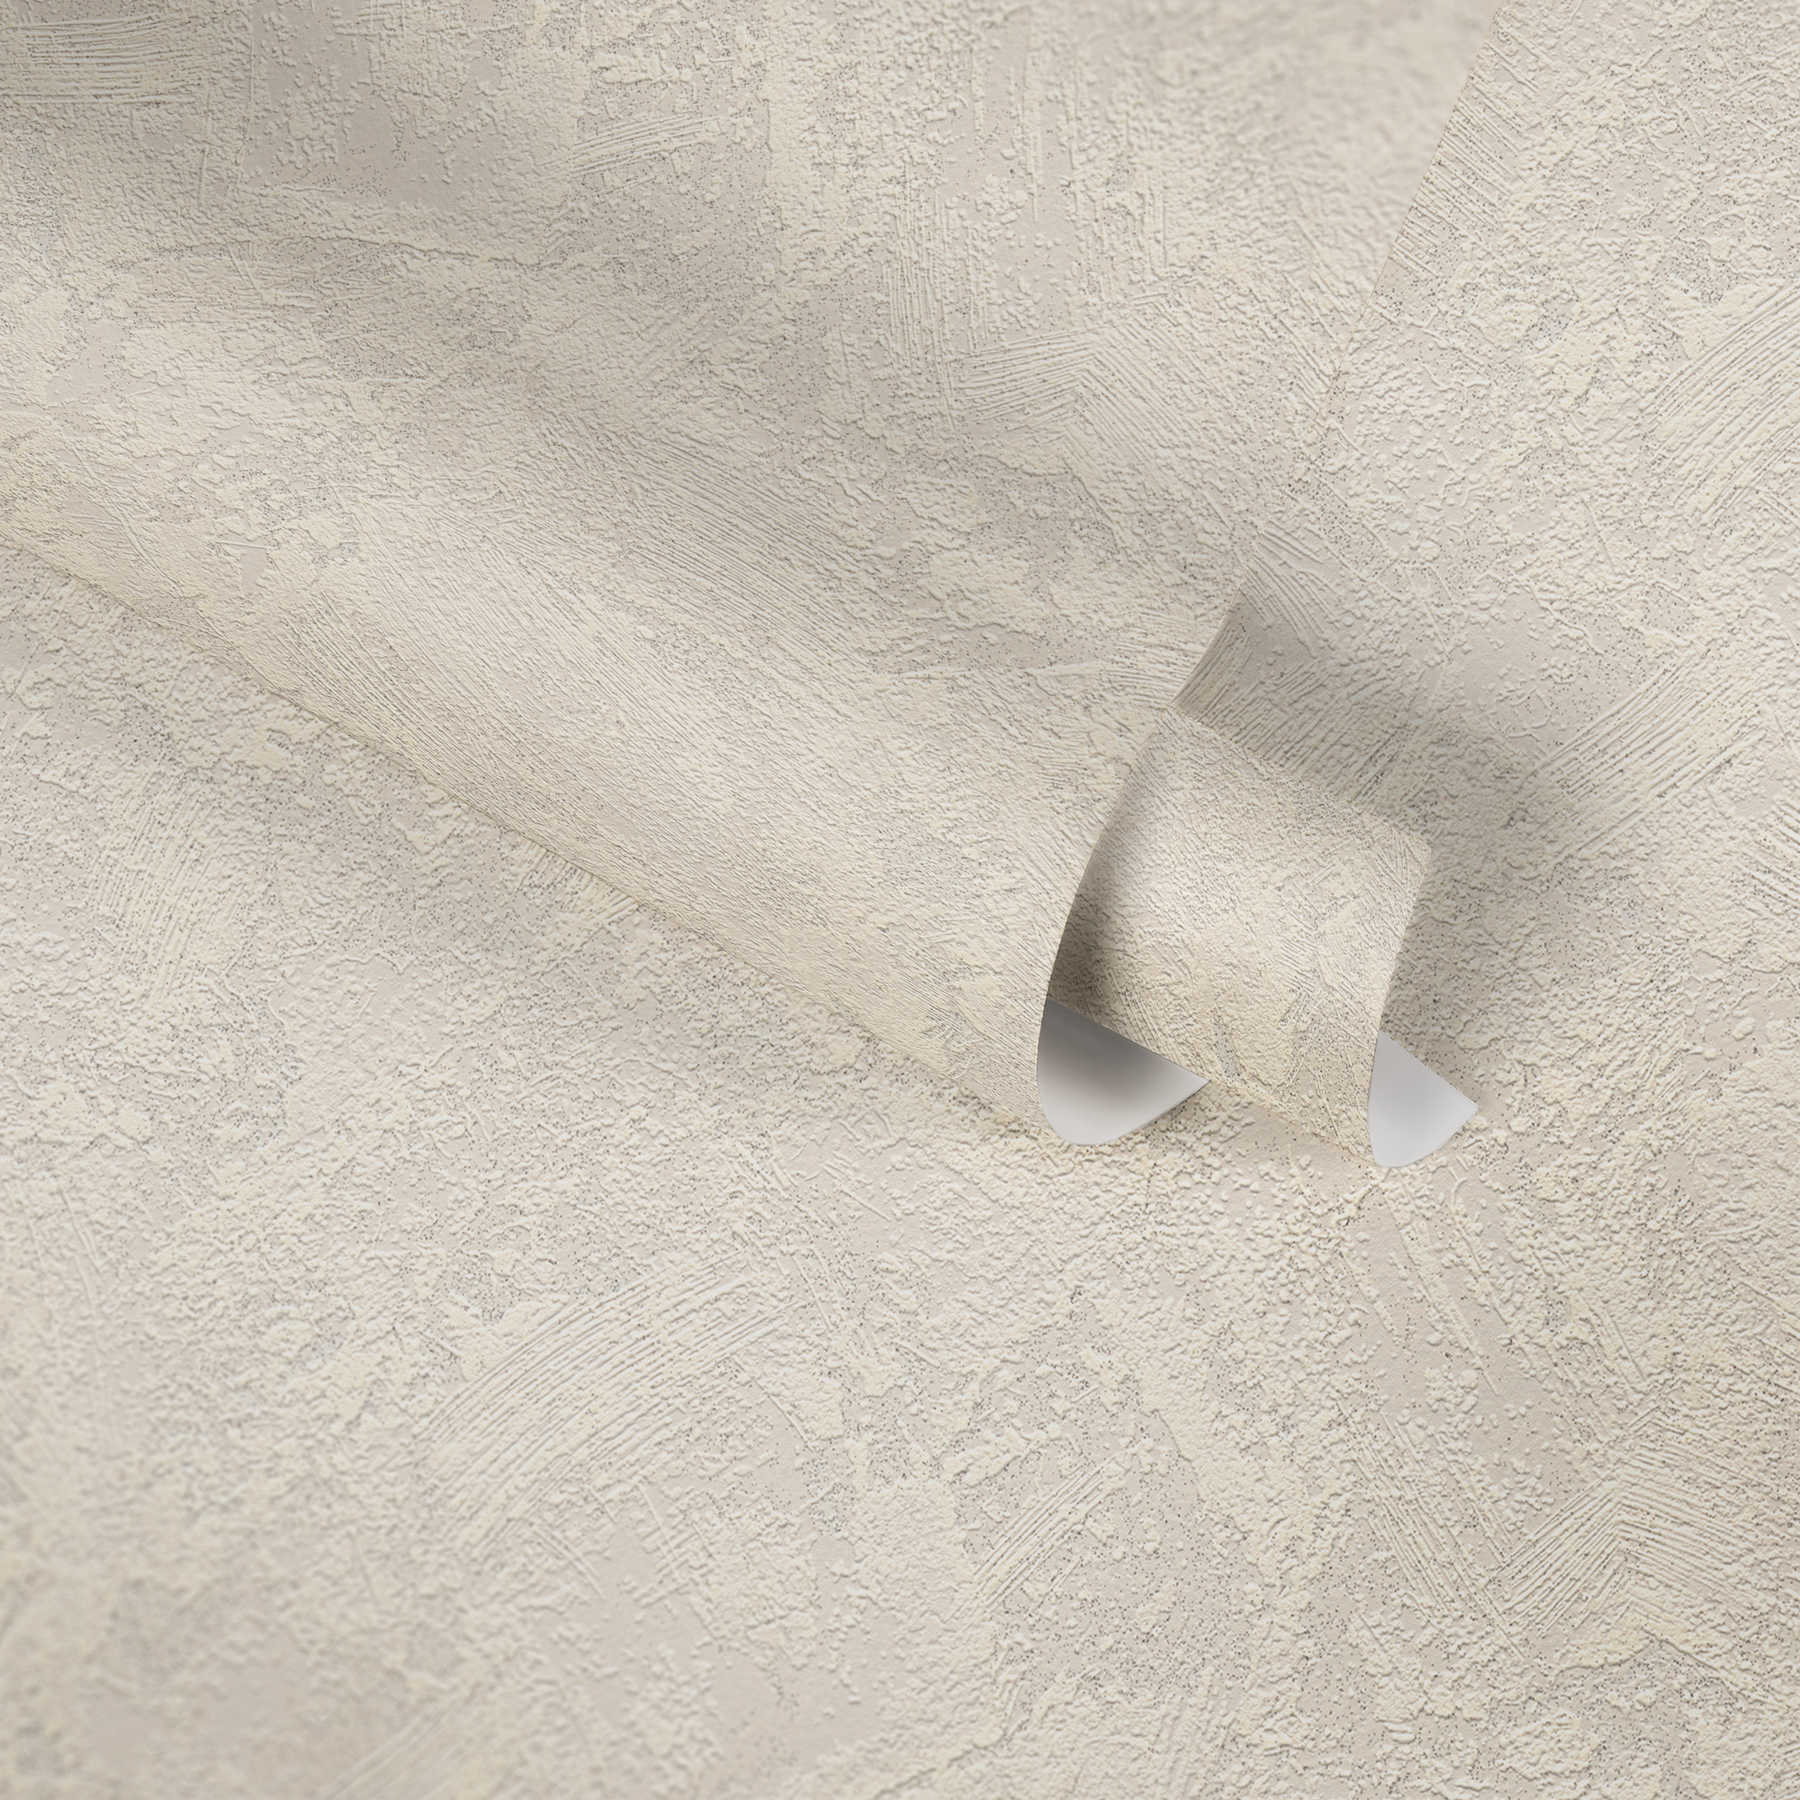             Plaster look non-woven wallpaper with rustic hatching - cream, grey
        